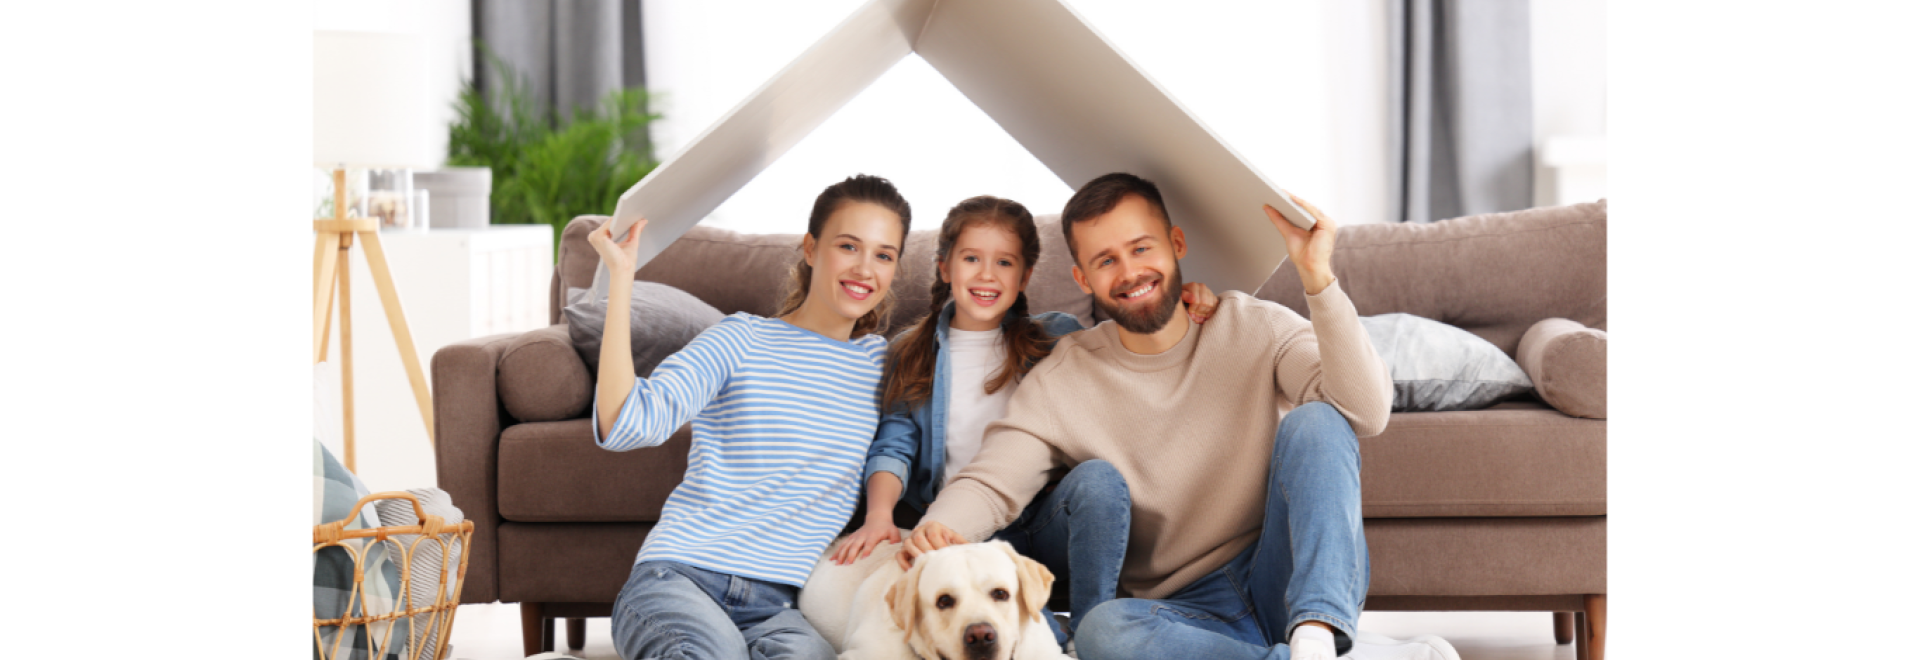 Family indoors with dog